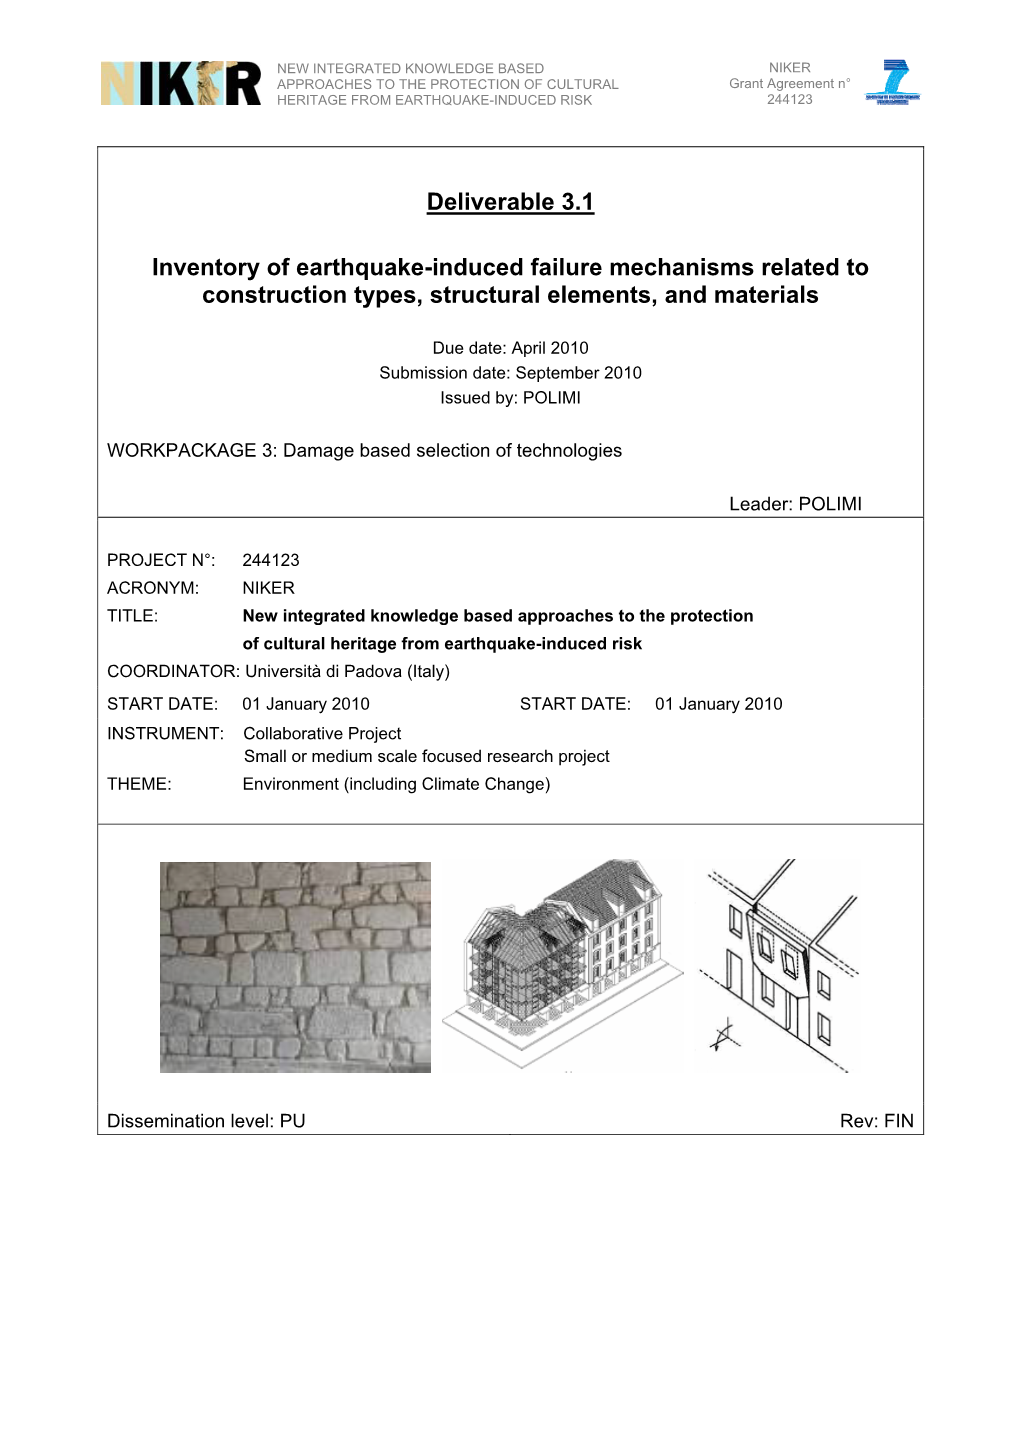 Inventory of Earthquake Induced Failure Mechanisms